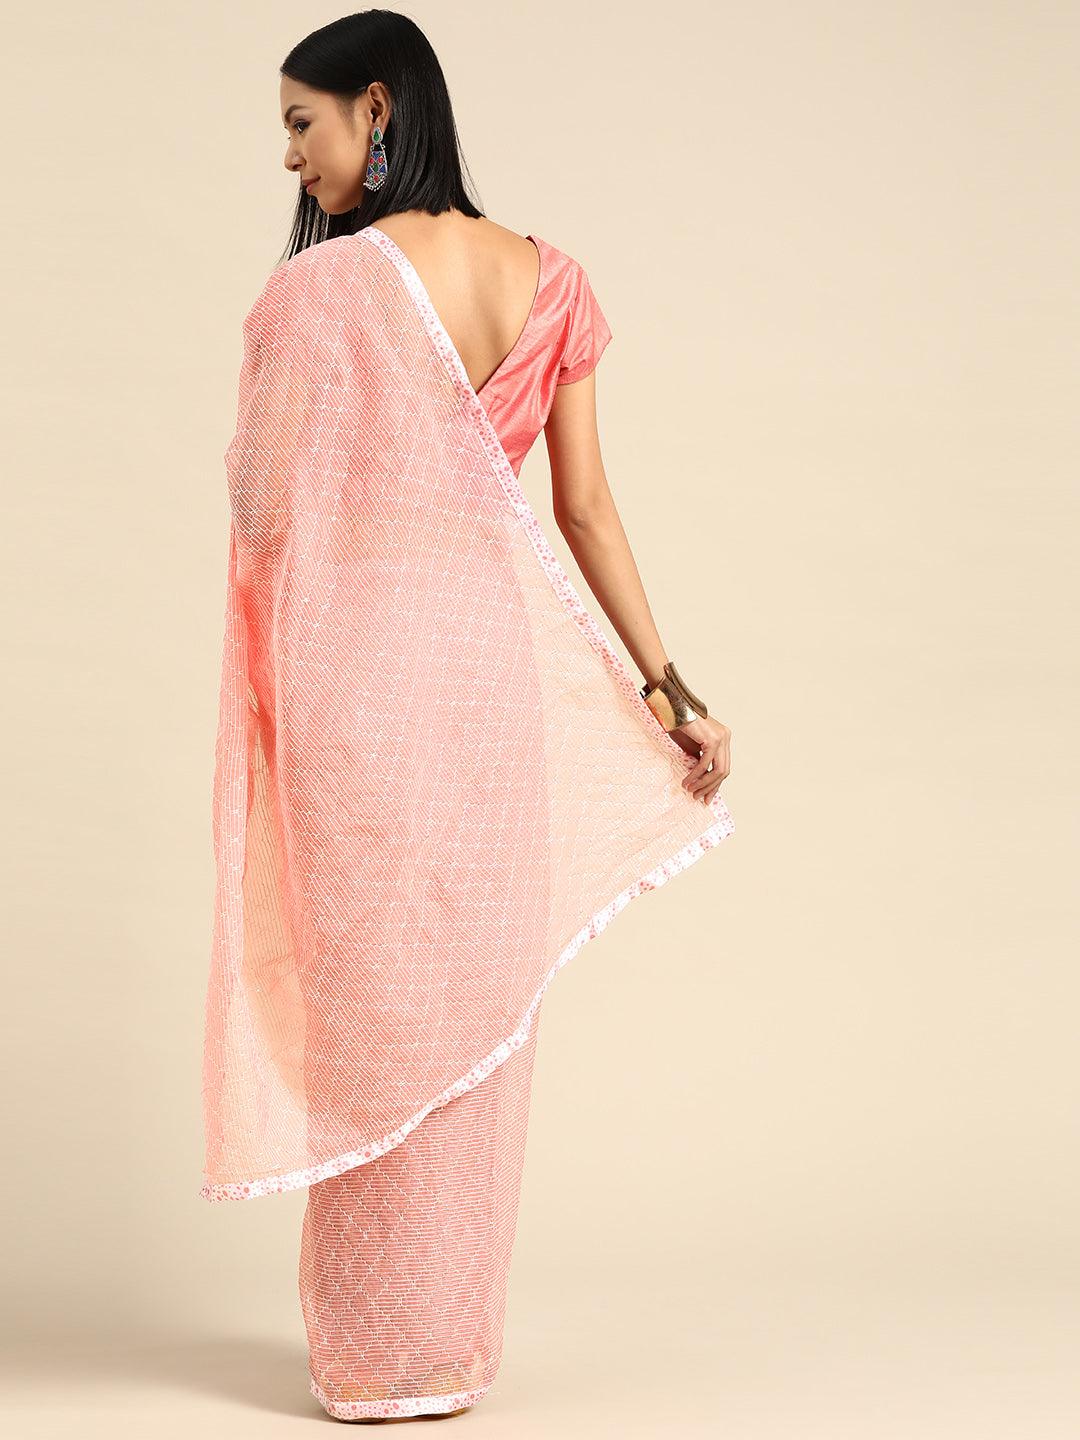 Trendy Women Striped Embroidered Work Pure Chiffon Saree In Pink - Indiakreations